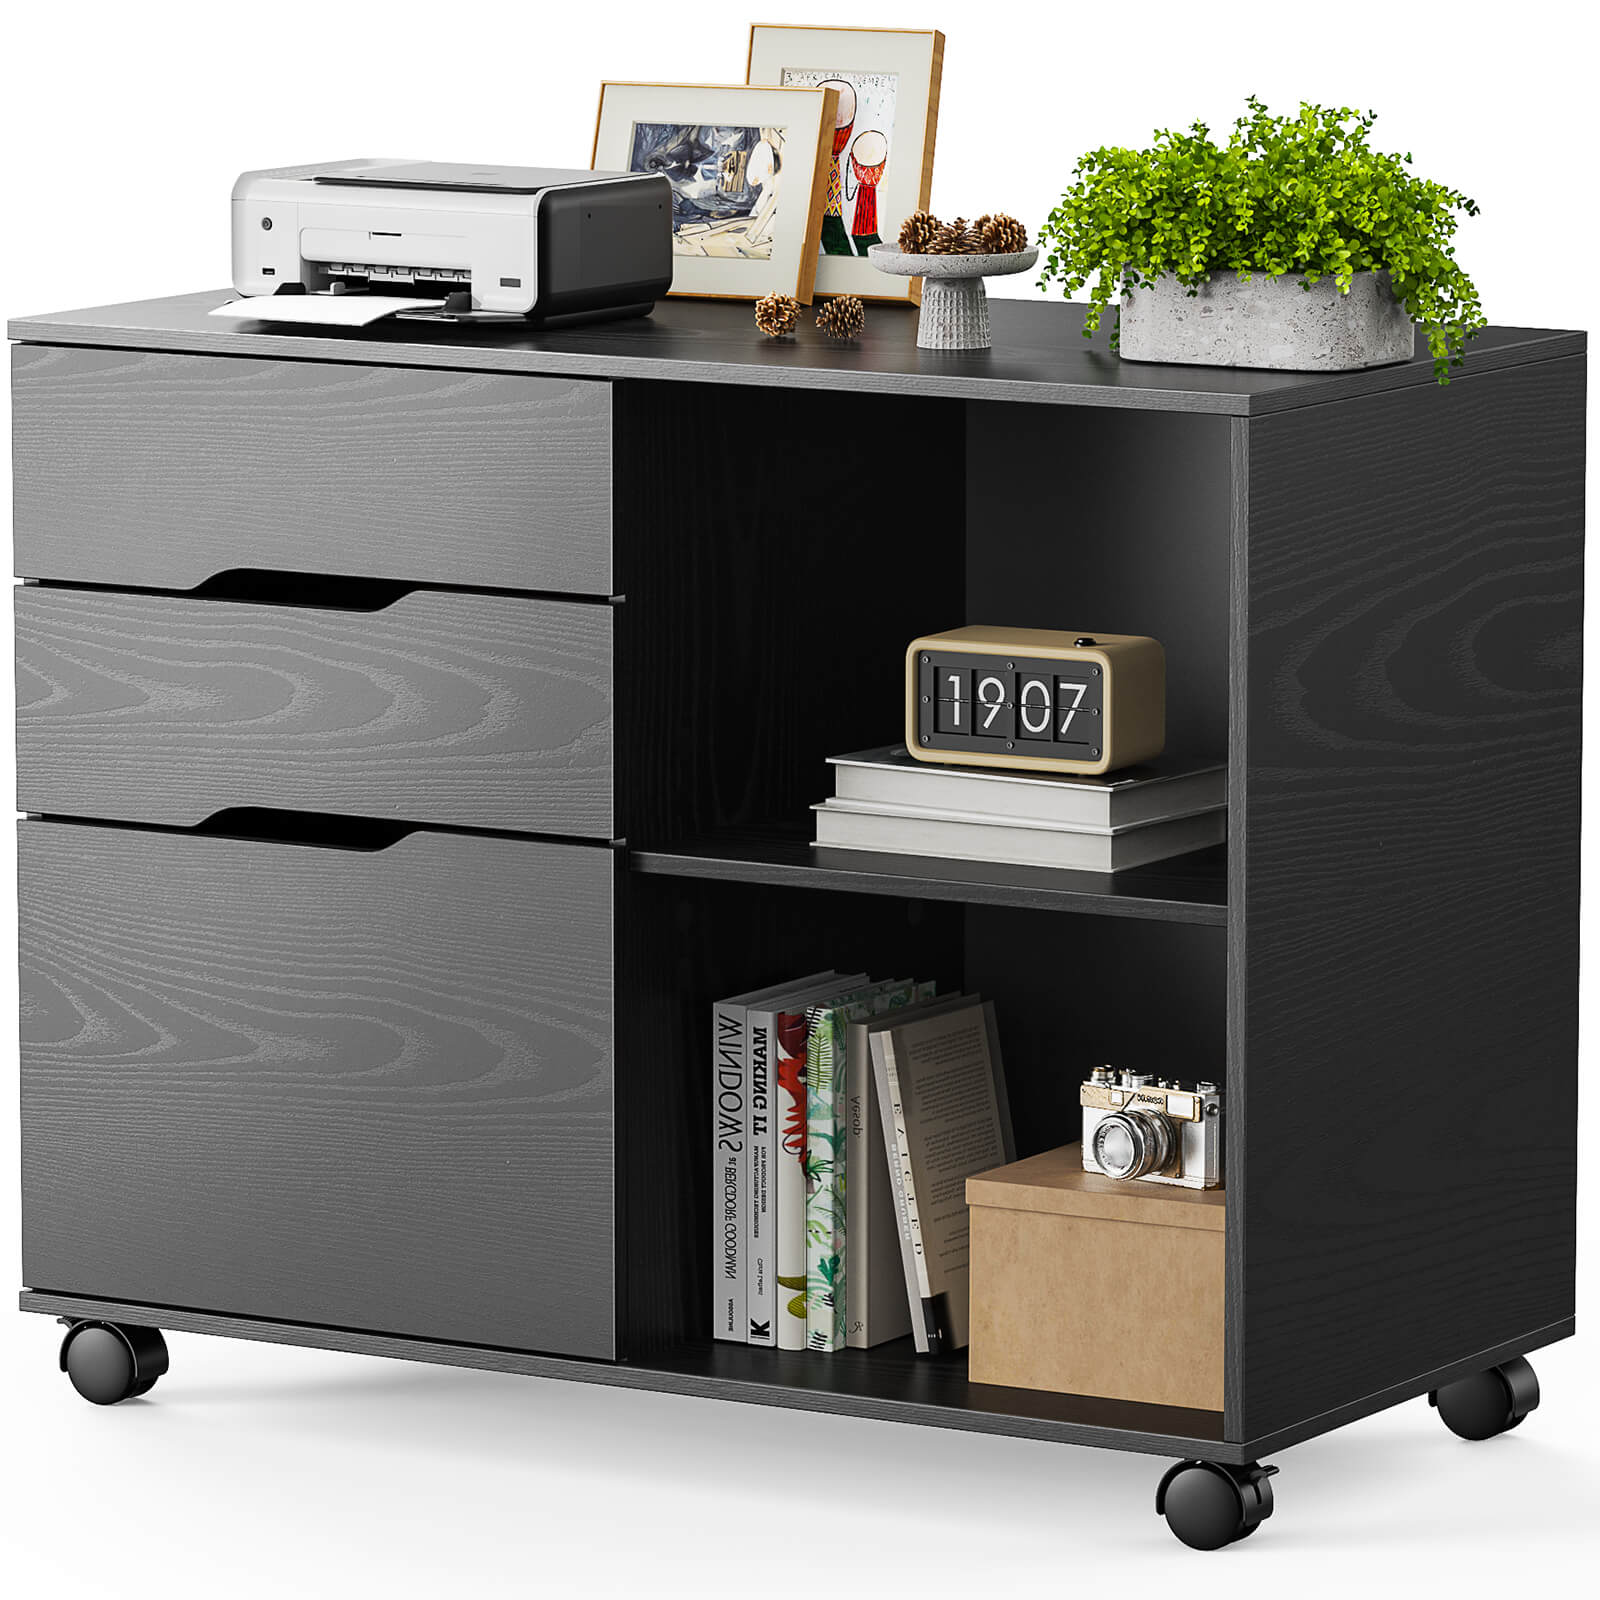 Lateral File Cabinet - with 3 Drawers, Rolling Wooden File Storage Drawer, Black Printer Stand Under Desk Organiser for Office, Home